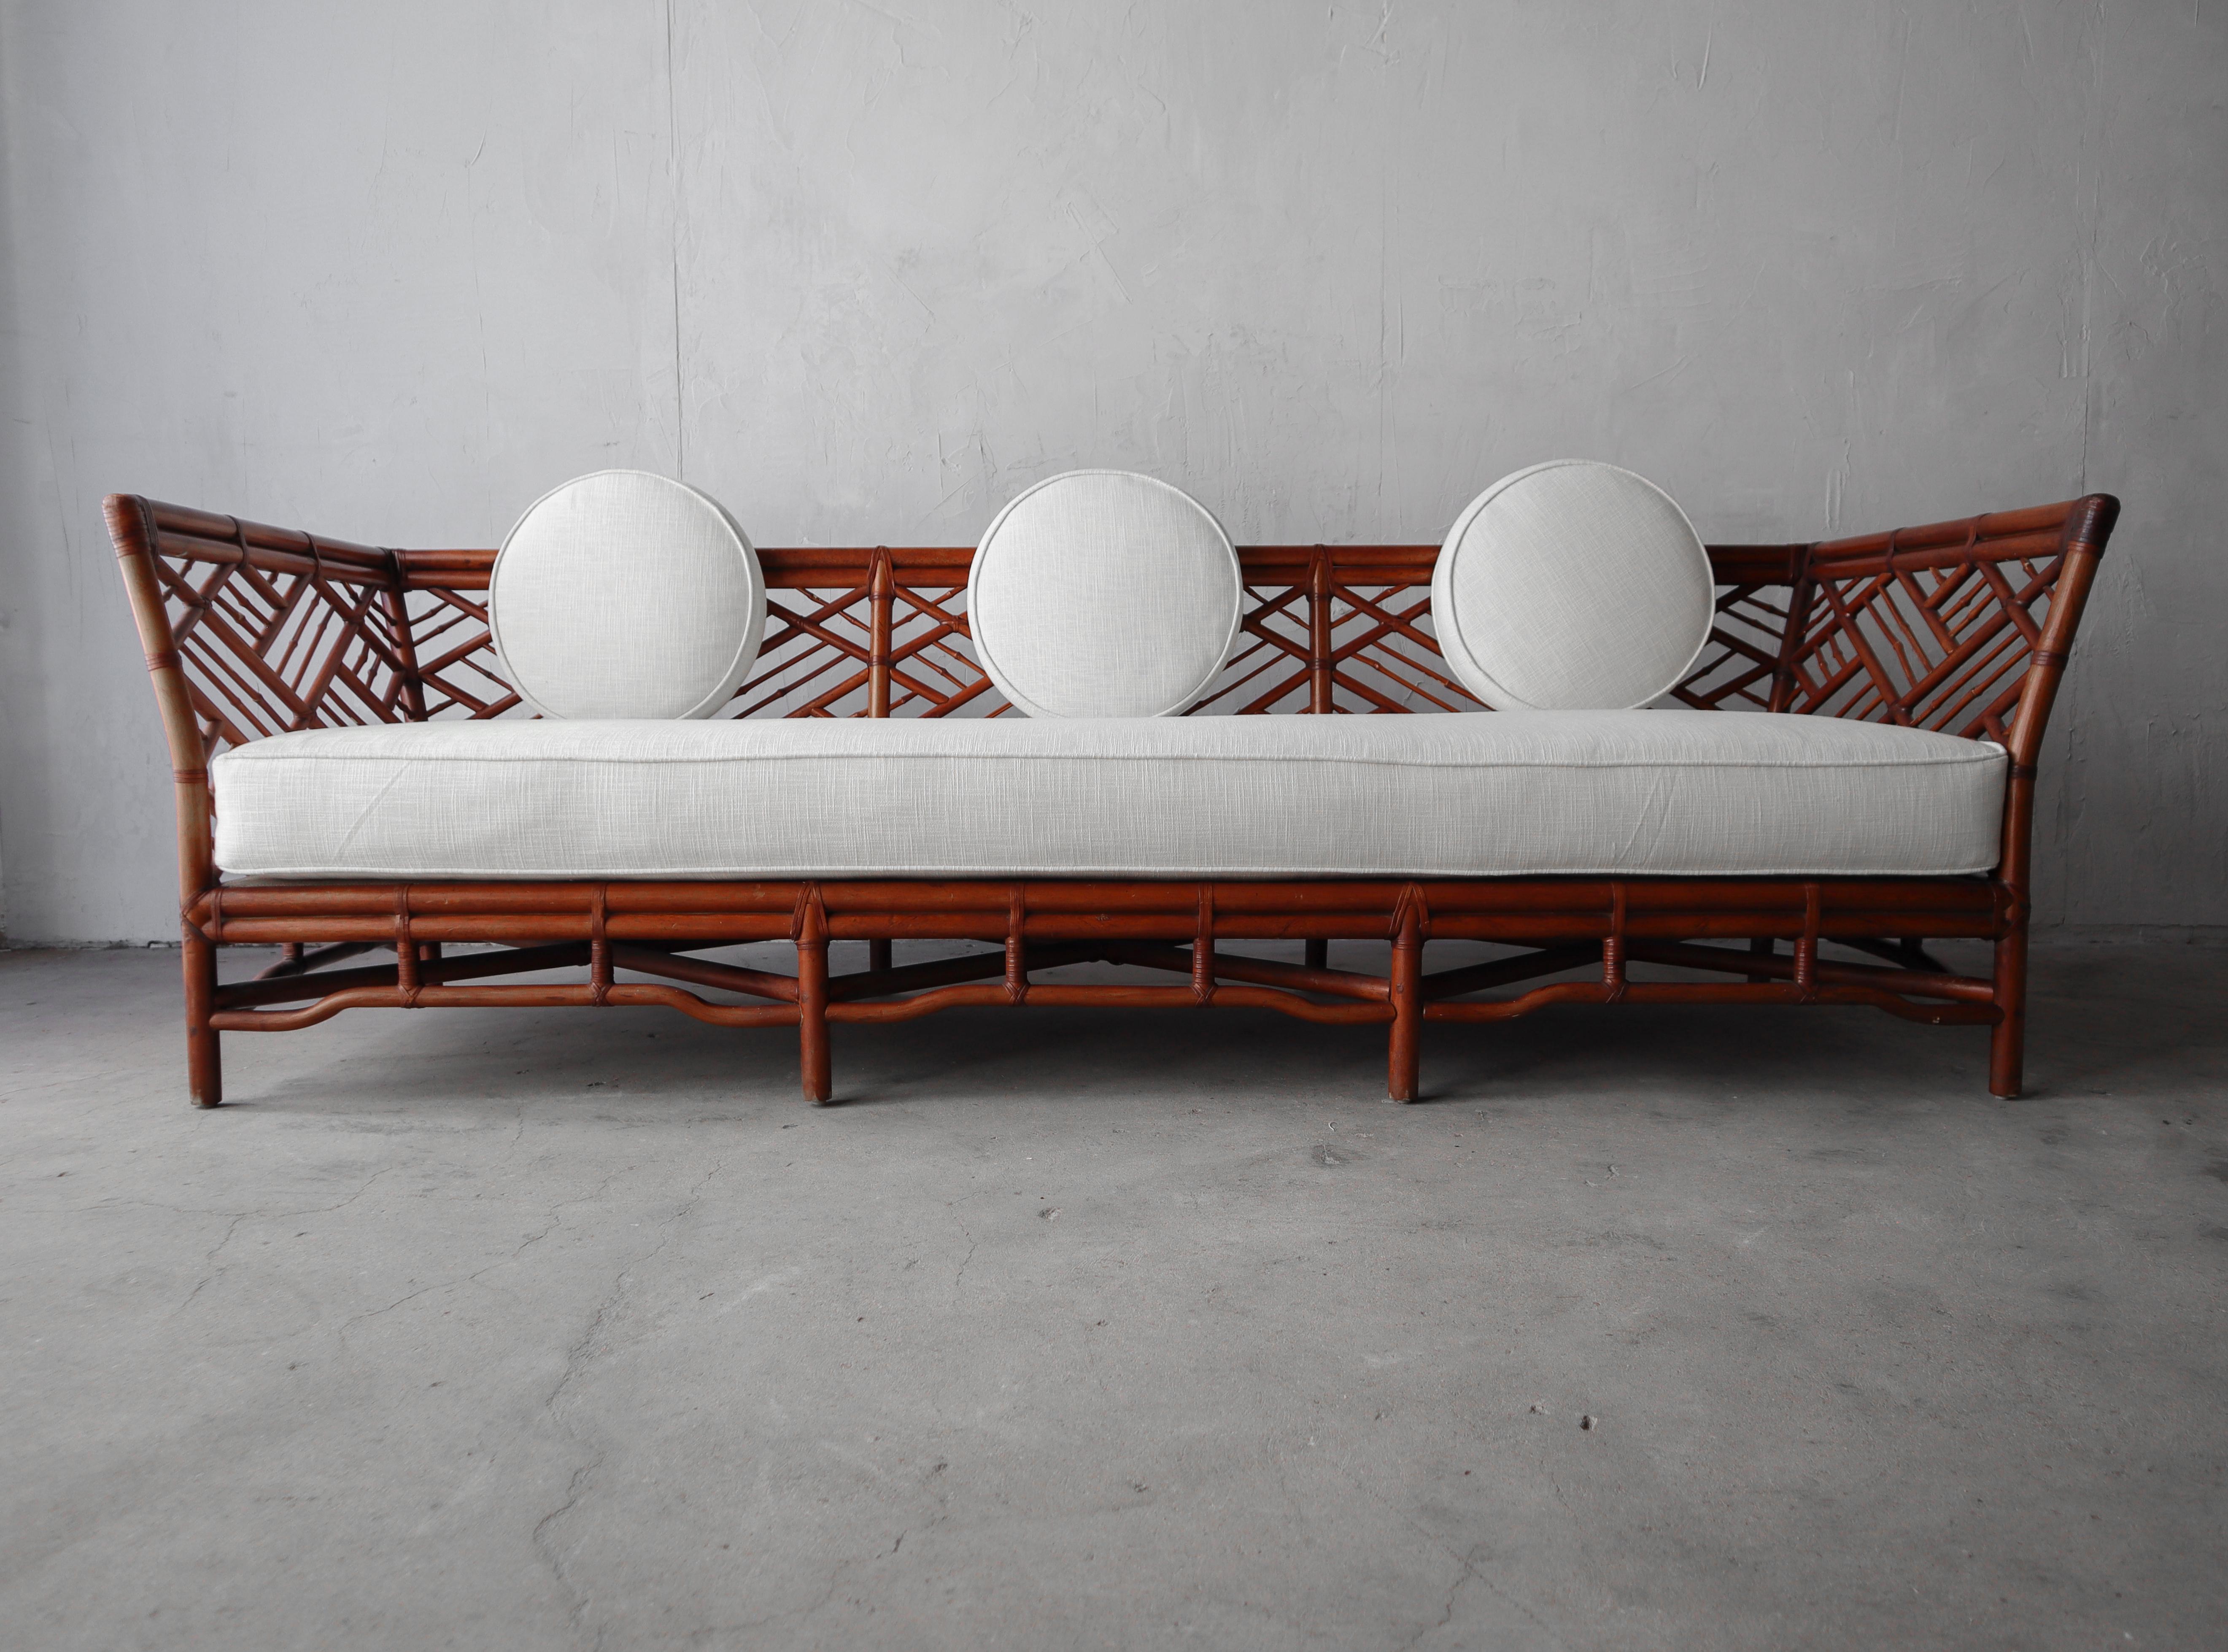 Stunning example of vintage bamboo. This gorgeous bamboo daybed sofa has show stopping details that will add warmth and texture to any space. It has been modernized with all new foam and fabric and stylish round back cushions, taking it from kitch